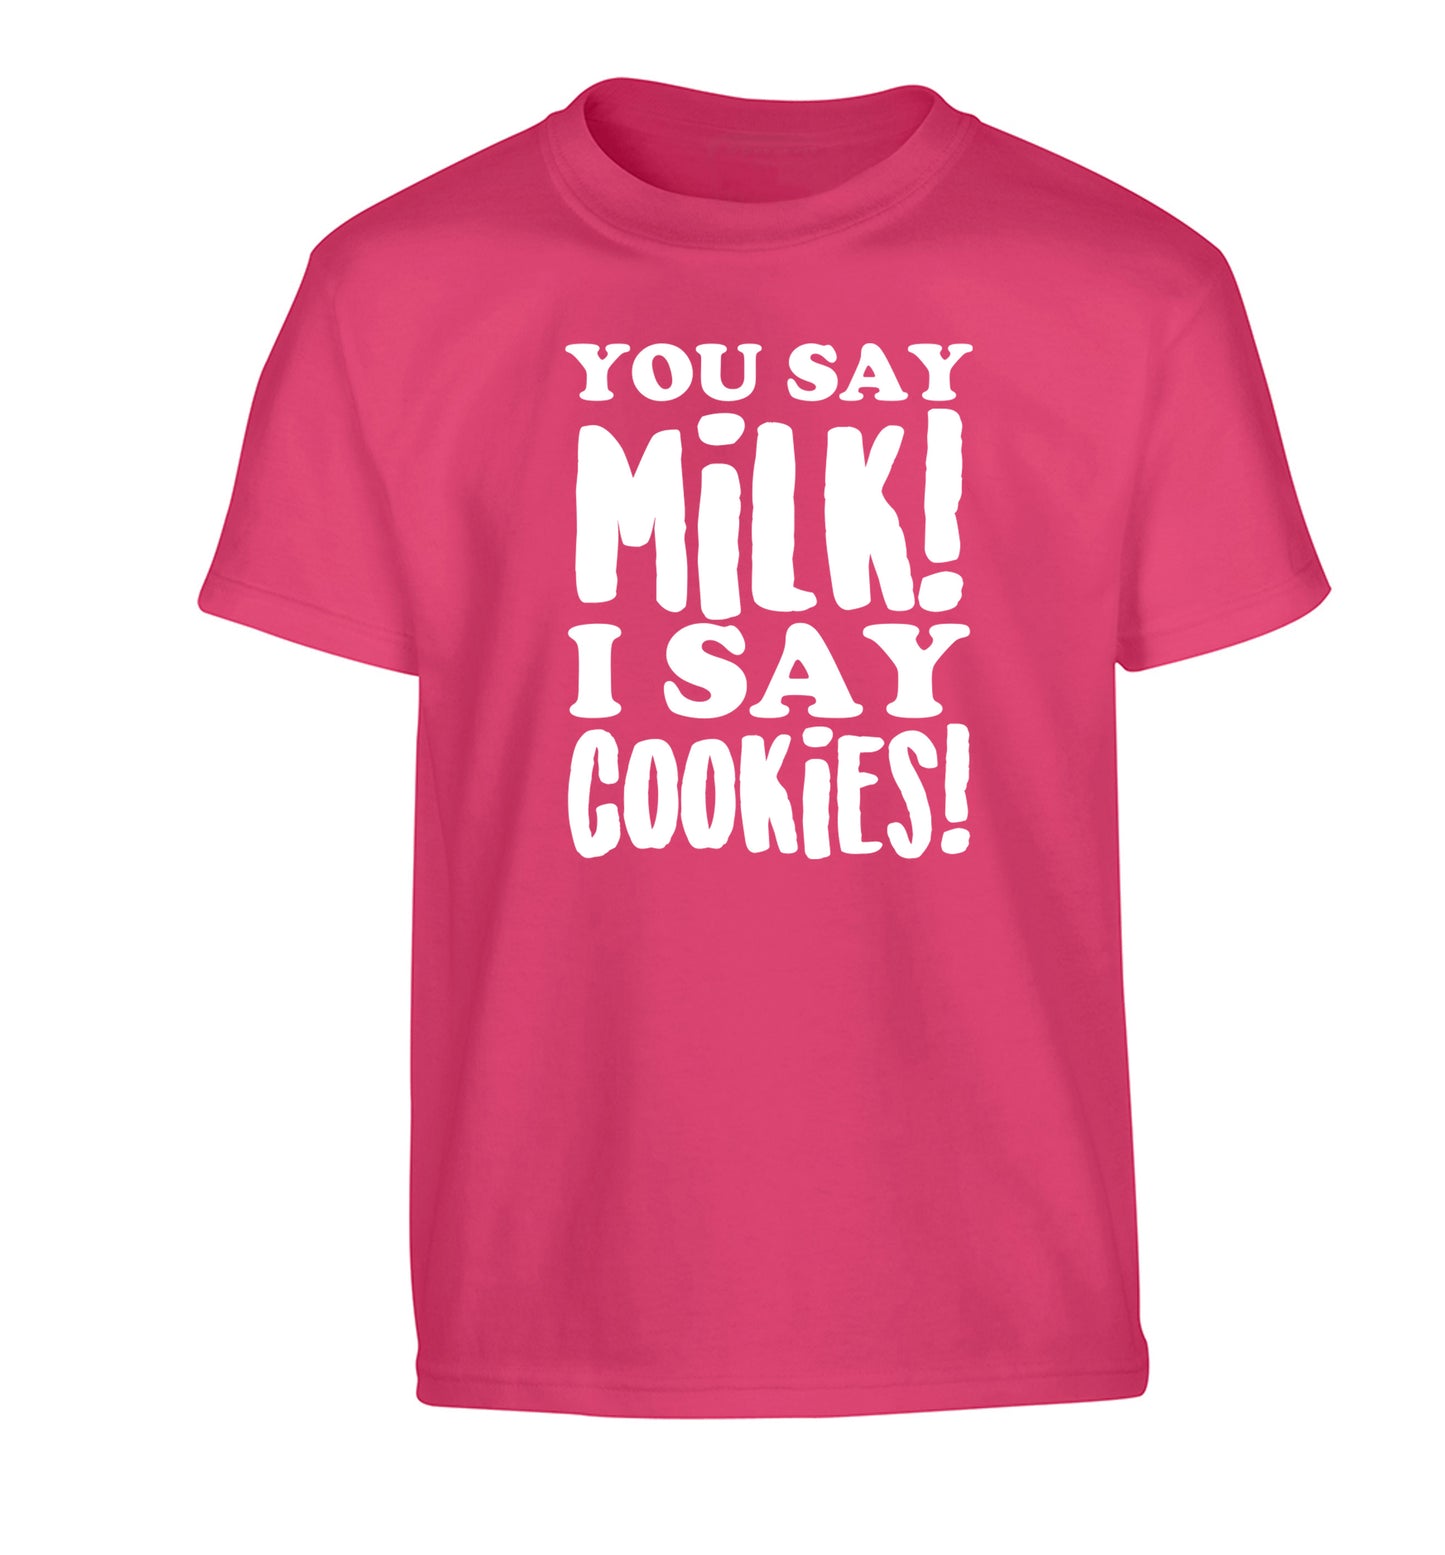 You say milk I say cookies! Children's pink Tshirt 12-14 Years